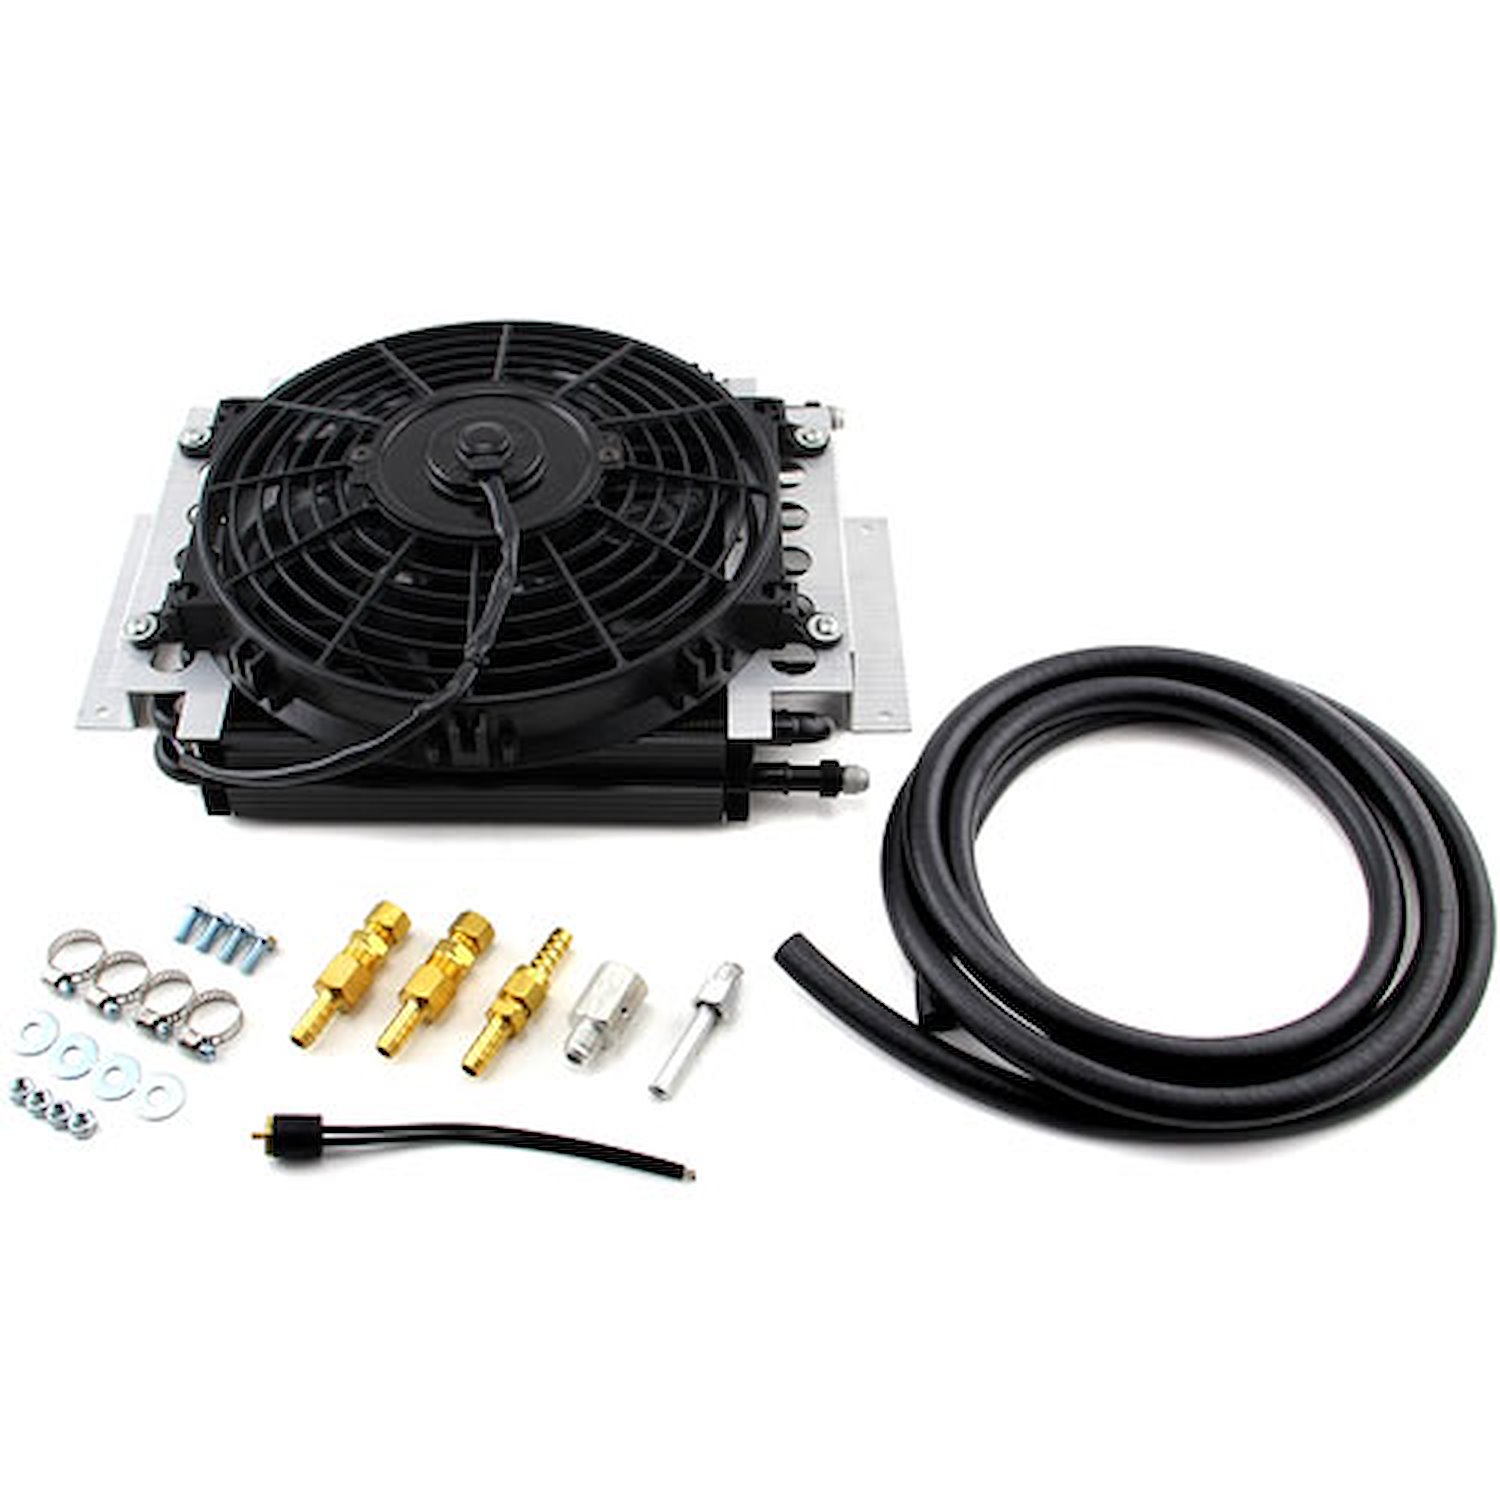 Dual Pass Transmission Oil Cooler & Fan Kit Overall: 11.5" H x 5" T x 12.5" W